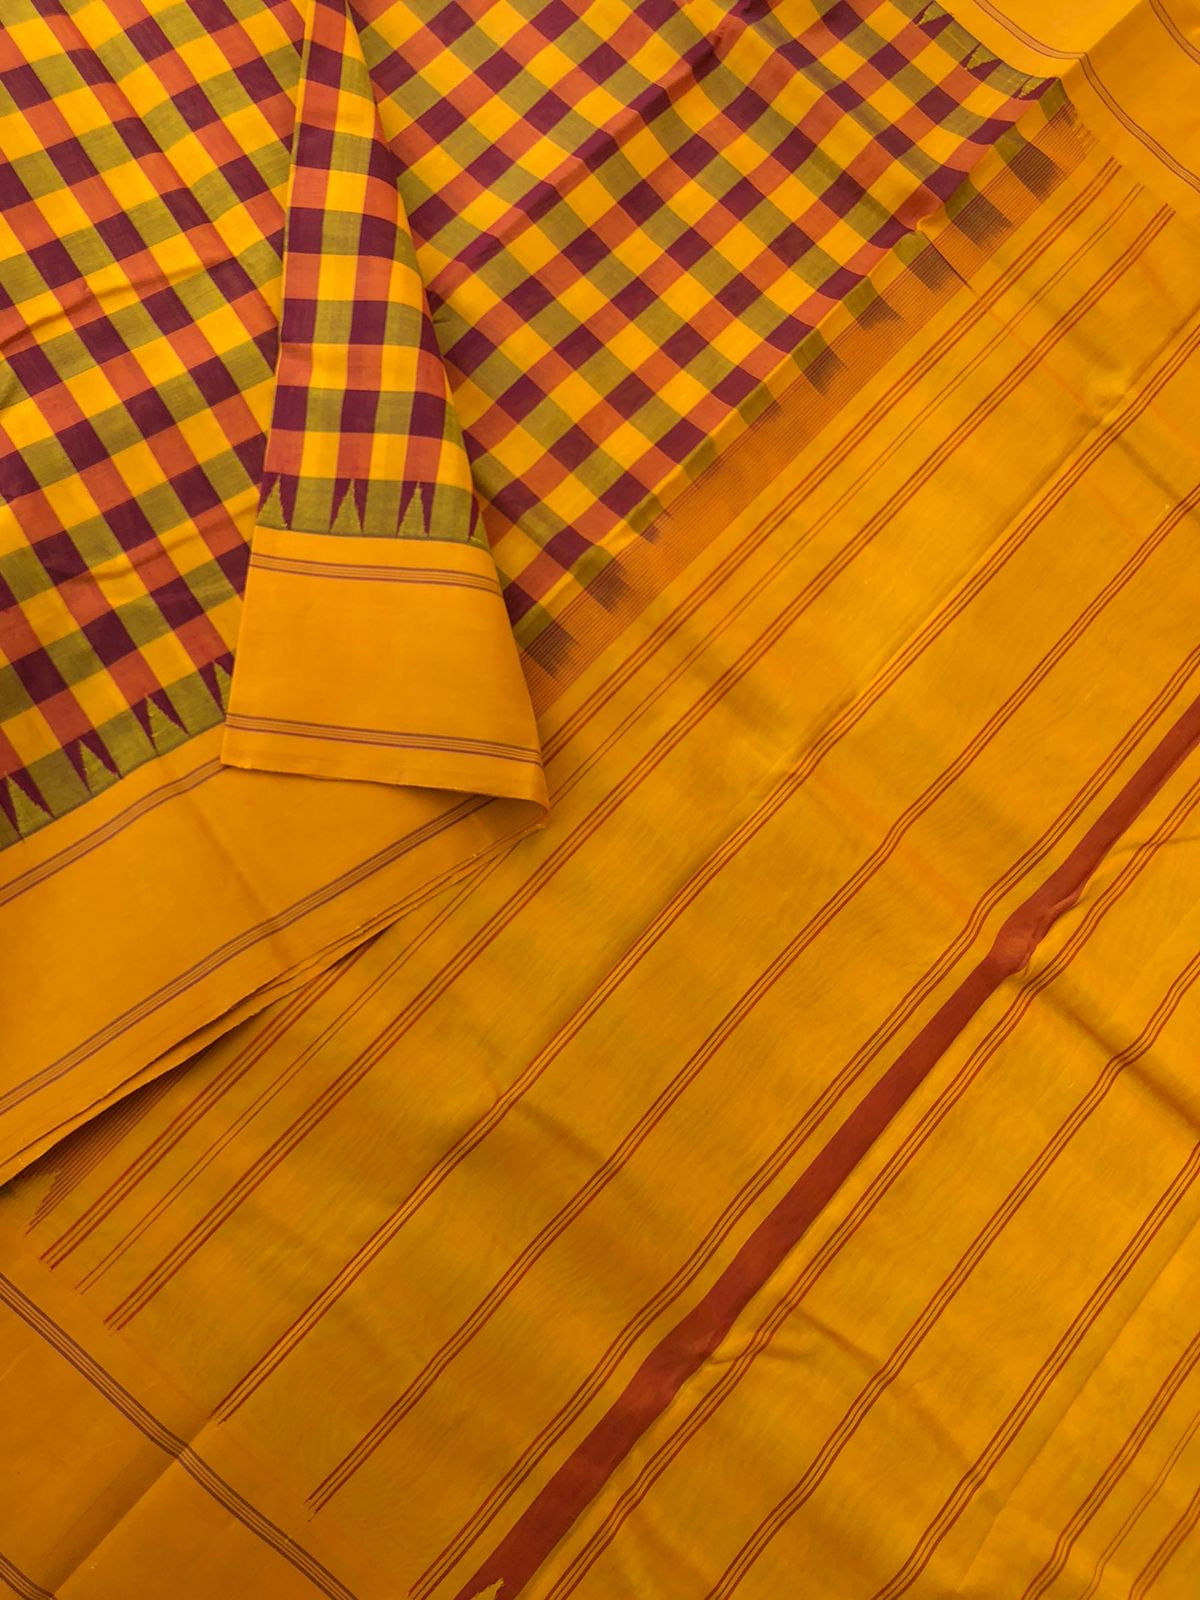 Signature Korvai Silk Cottons - the gorgeous chettinad style aaraku and mustard chexs with mustard borders and pallu